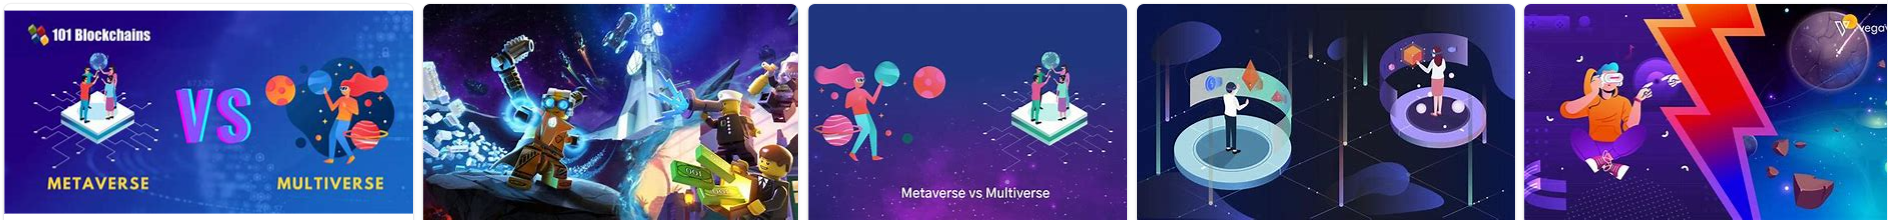 Metaverse Vs Multiverse Whats The Difference?